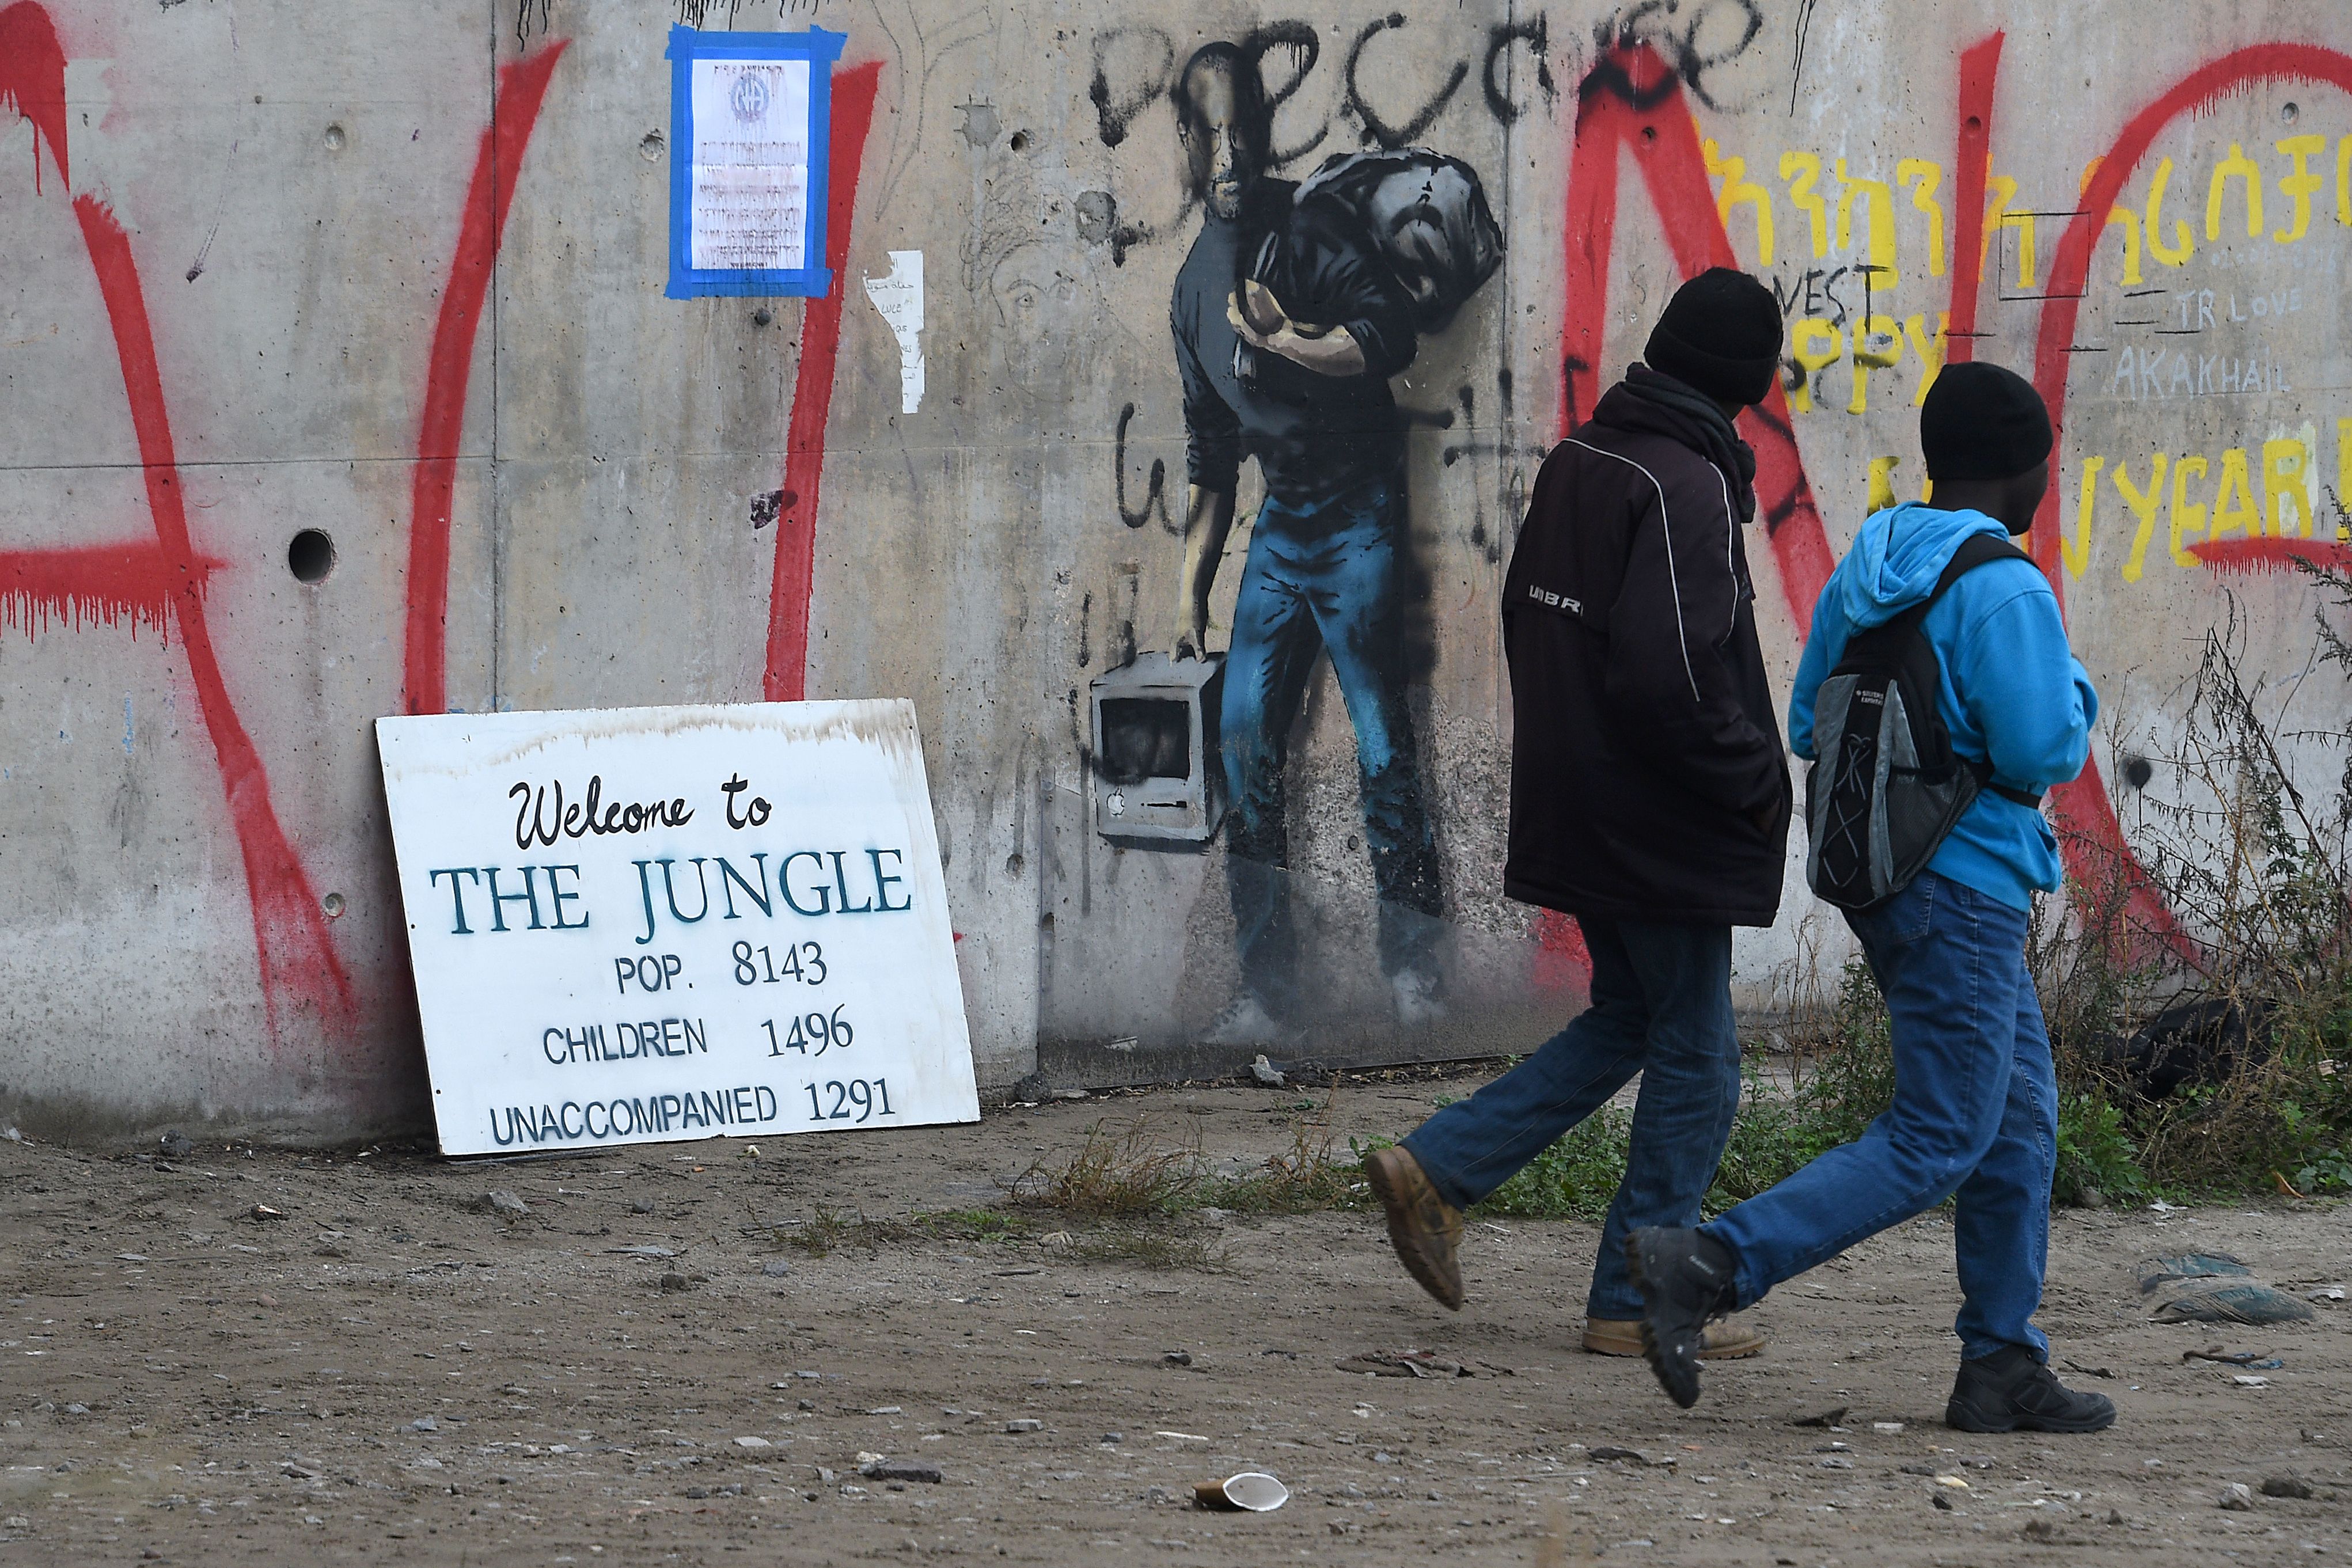 Migrants walk past a graffiti by street artist Banksy representing Apple founder Steve Jobs as a migrant during the full evacuation of the Calais "Jungle" camp, in Calais, northern France, on October 24, 2016. (DENIS CHARLET&mdash;AFP/Getty Images)